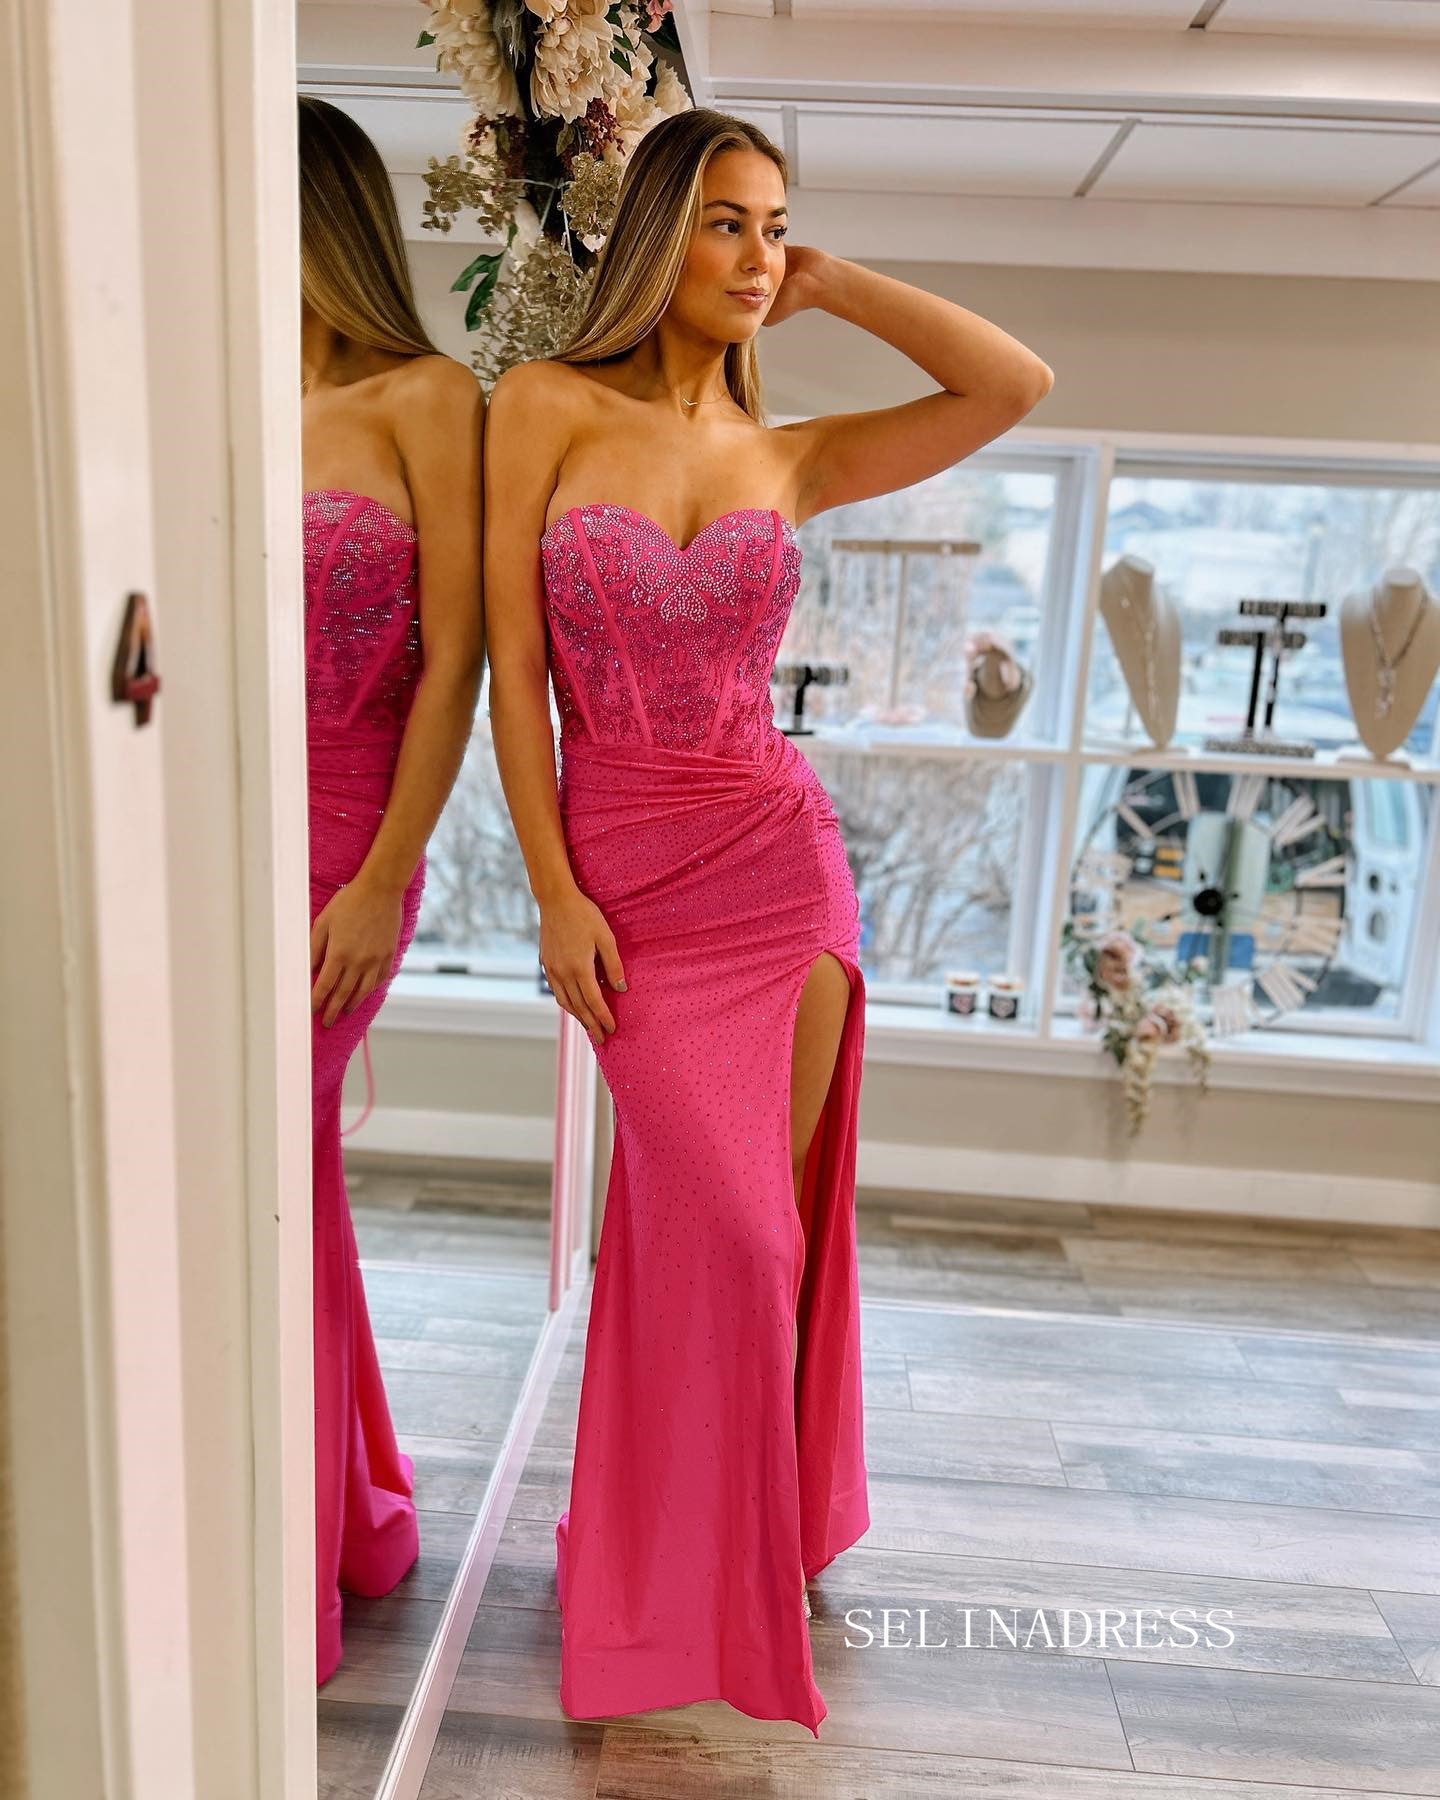 Buy Women's V Neck Lace Applique Prom Dresses Long Chiffon Bridesmaid Dress  Formal Evening Ball Gown (Pink-22 Plus) at Amazon.in